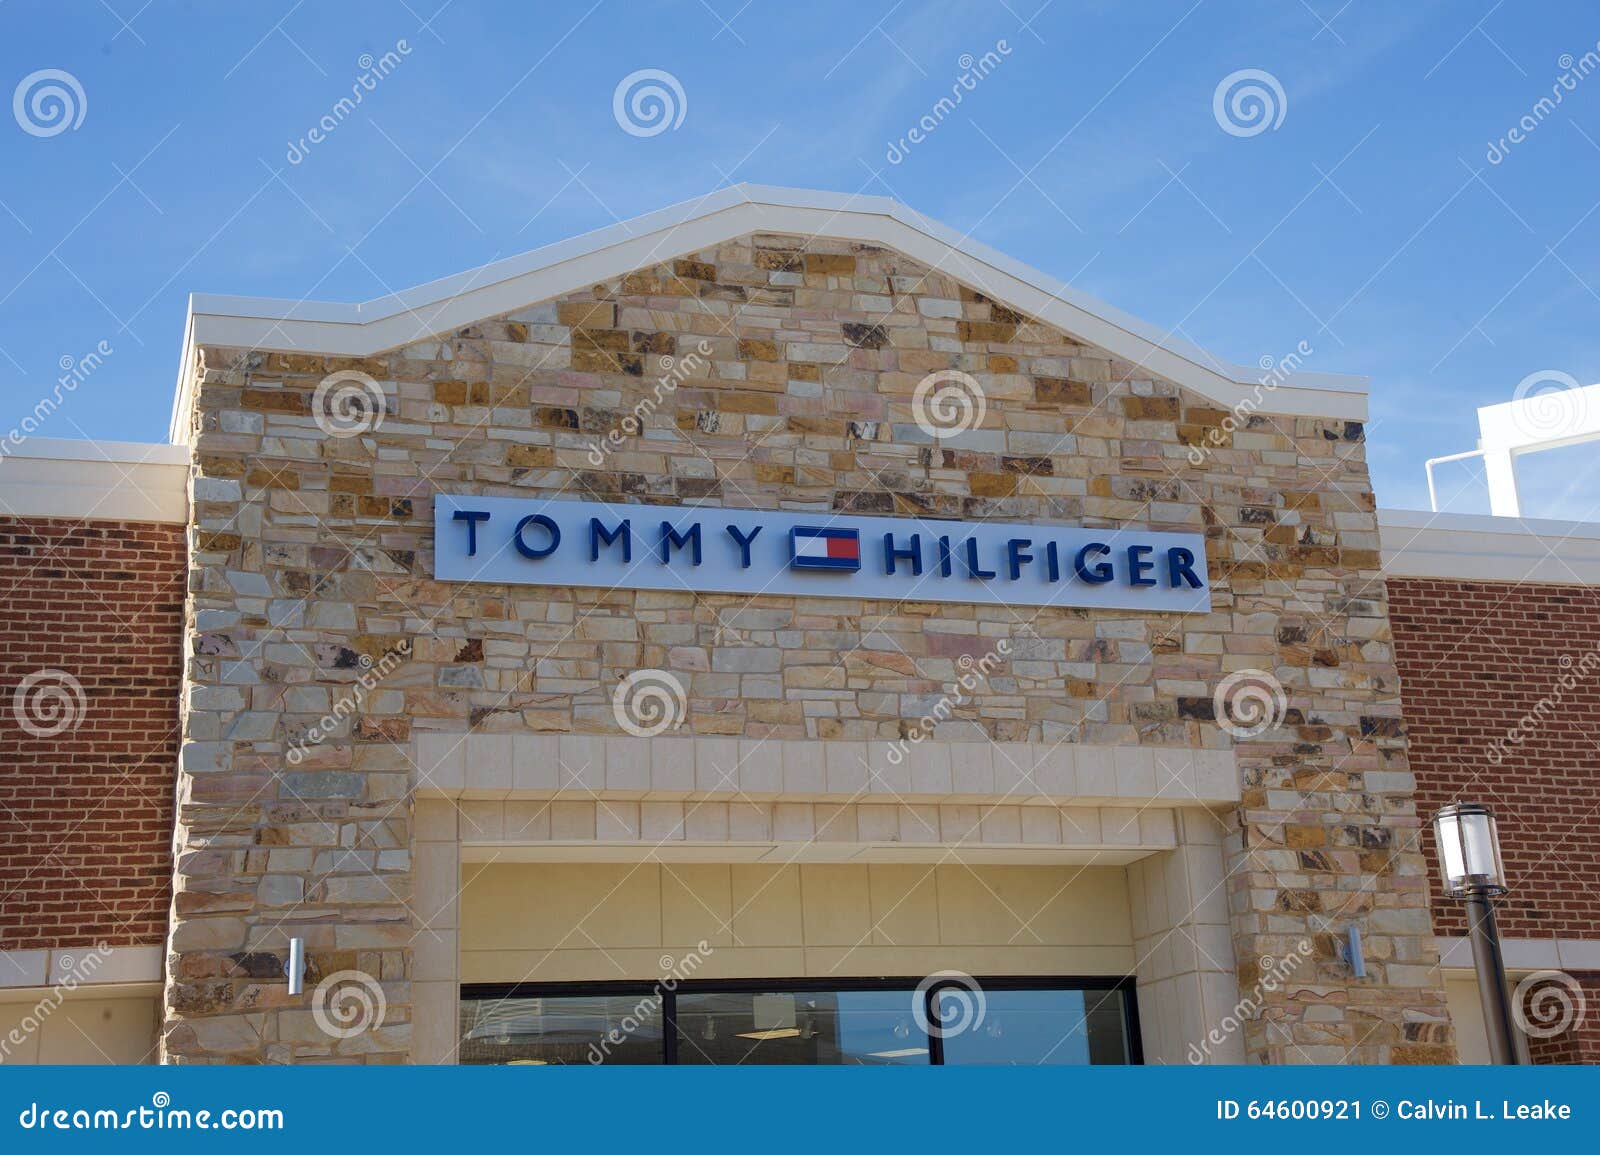 Standard Percentage Apt Tommy Hilfiger Shop at the Tanger Outlet Mall in Southaven, Mississippi  Editorial Photo - Image of cosmetics, products: 64600921